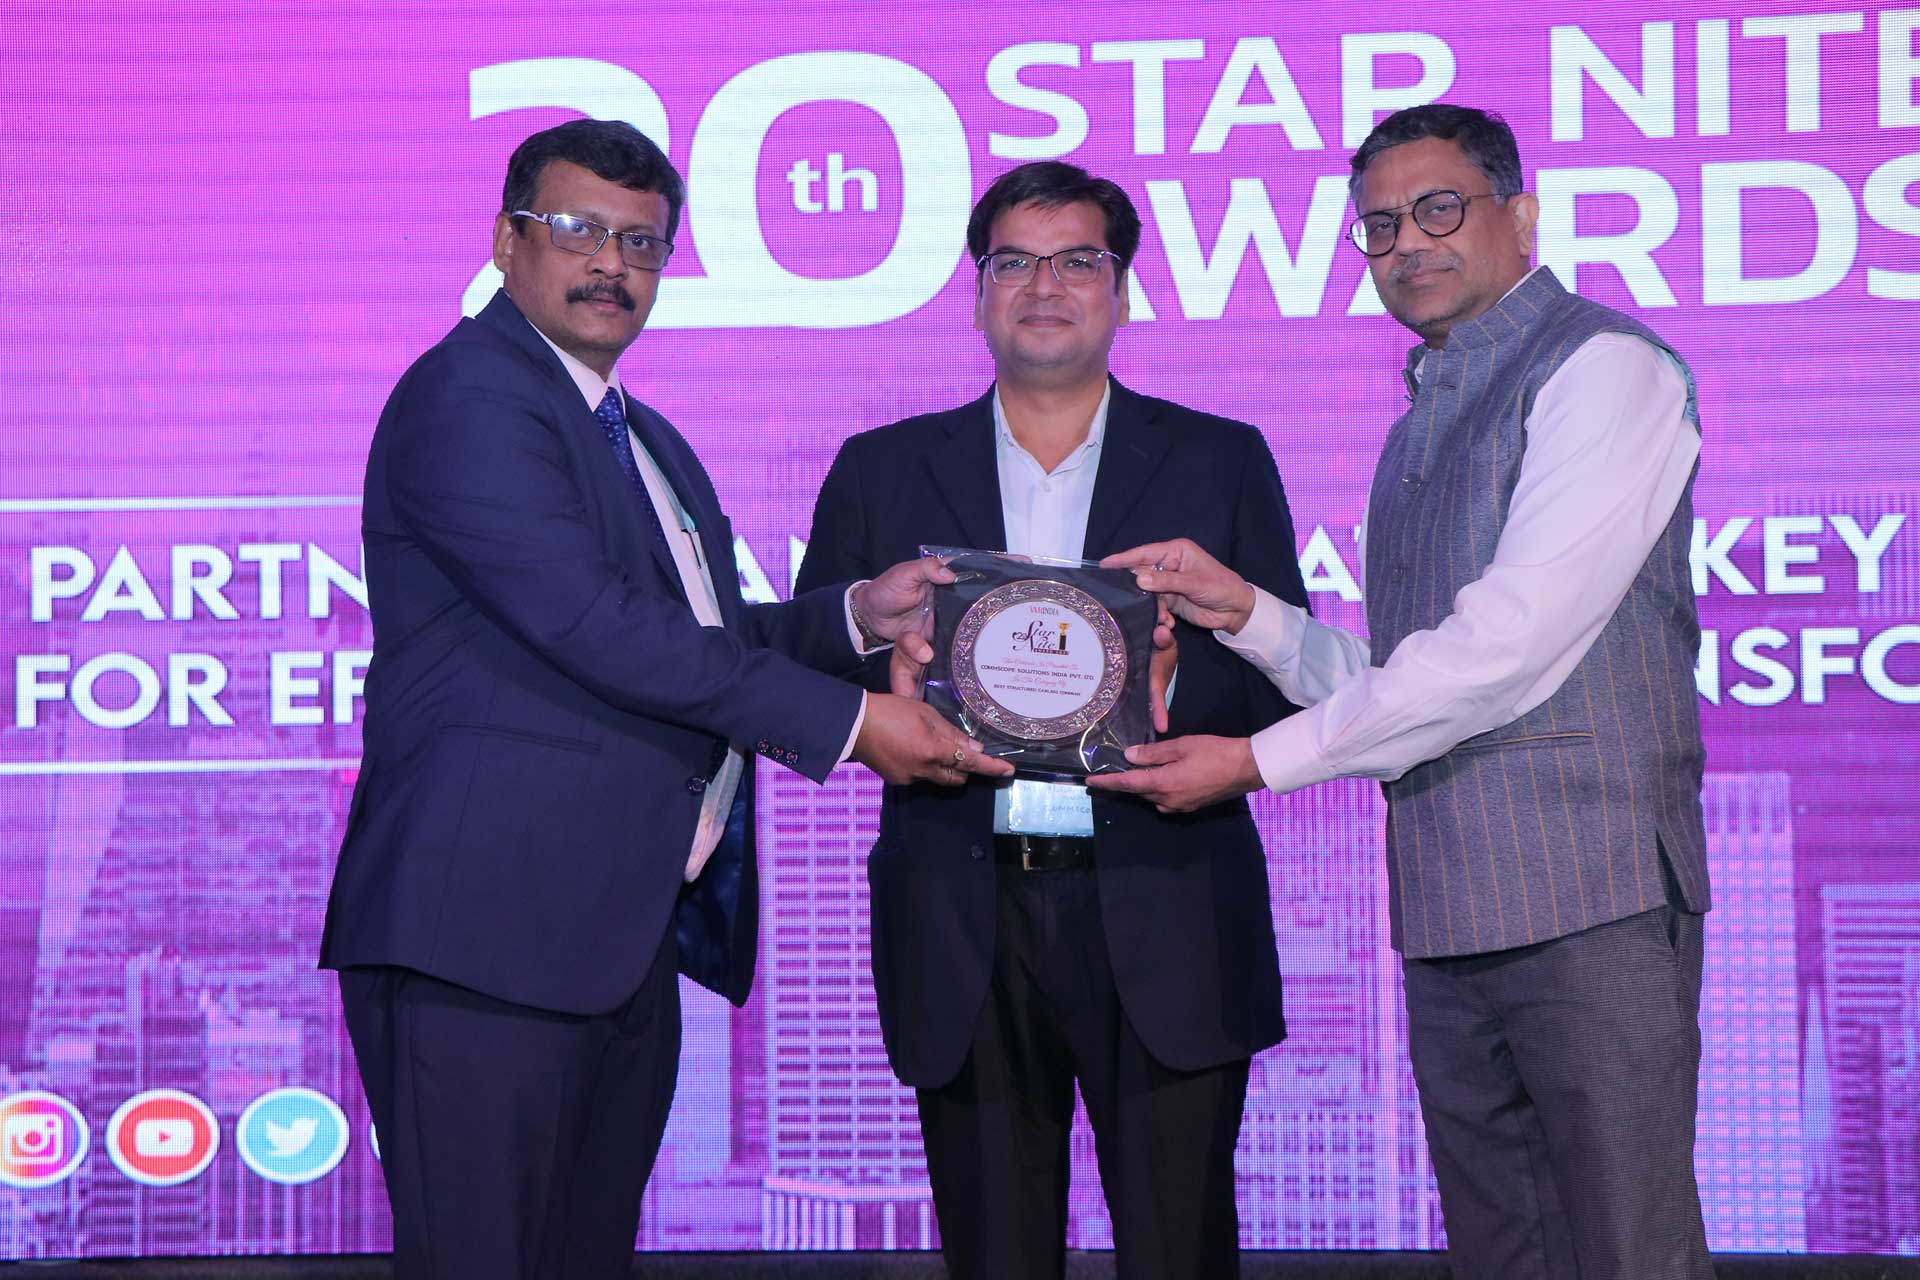 Best Structure Cabling Company Award goes to Commscope Solutions India at 20th Star Nite Awards 2021